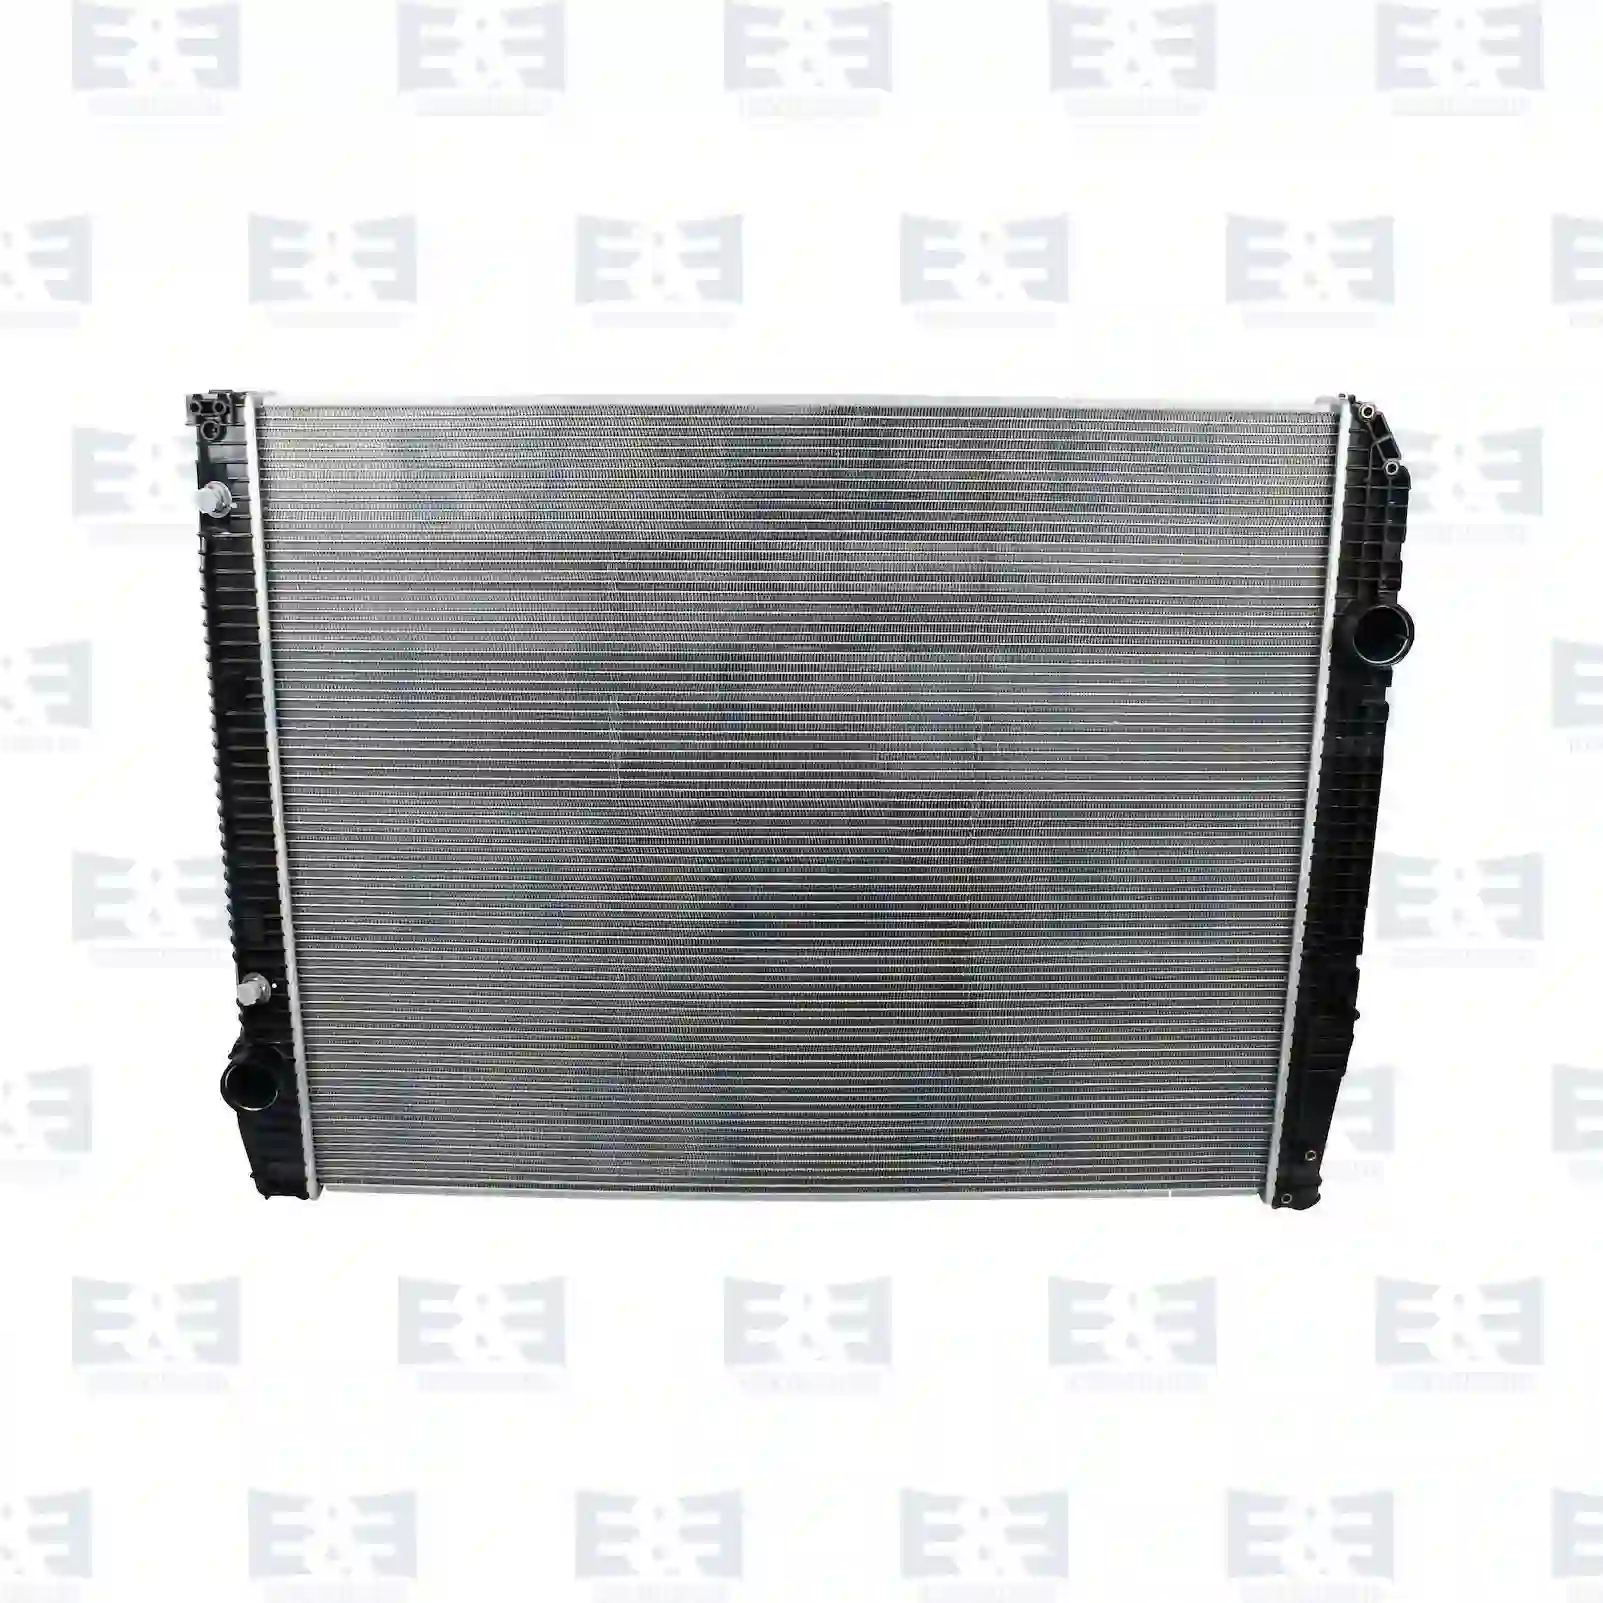  Radiator, without frame || E&E Truck Spare Parts | Truck Spare Parts, Auotomotive Spare Parts